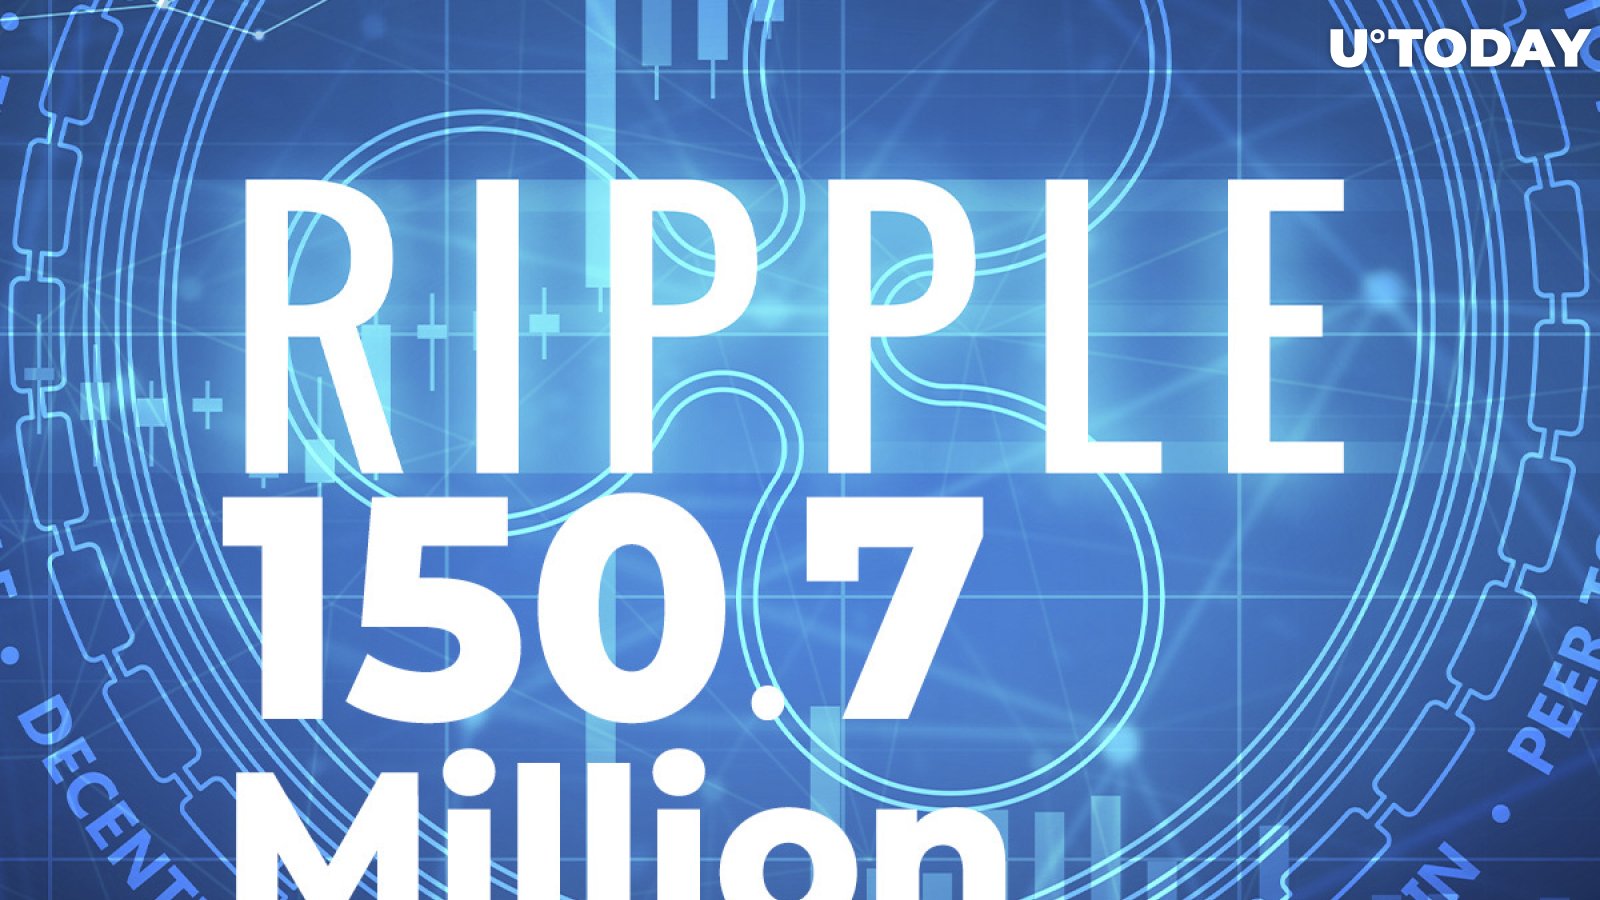 Jed McCaleb Sells 150.7 Million in Past 3 Weeks After Receiving 291.5 Million from Ripple